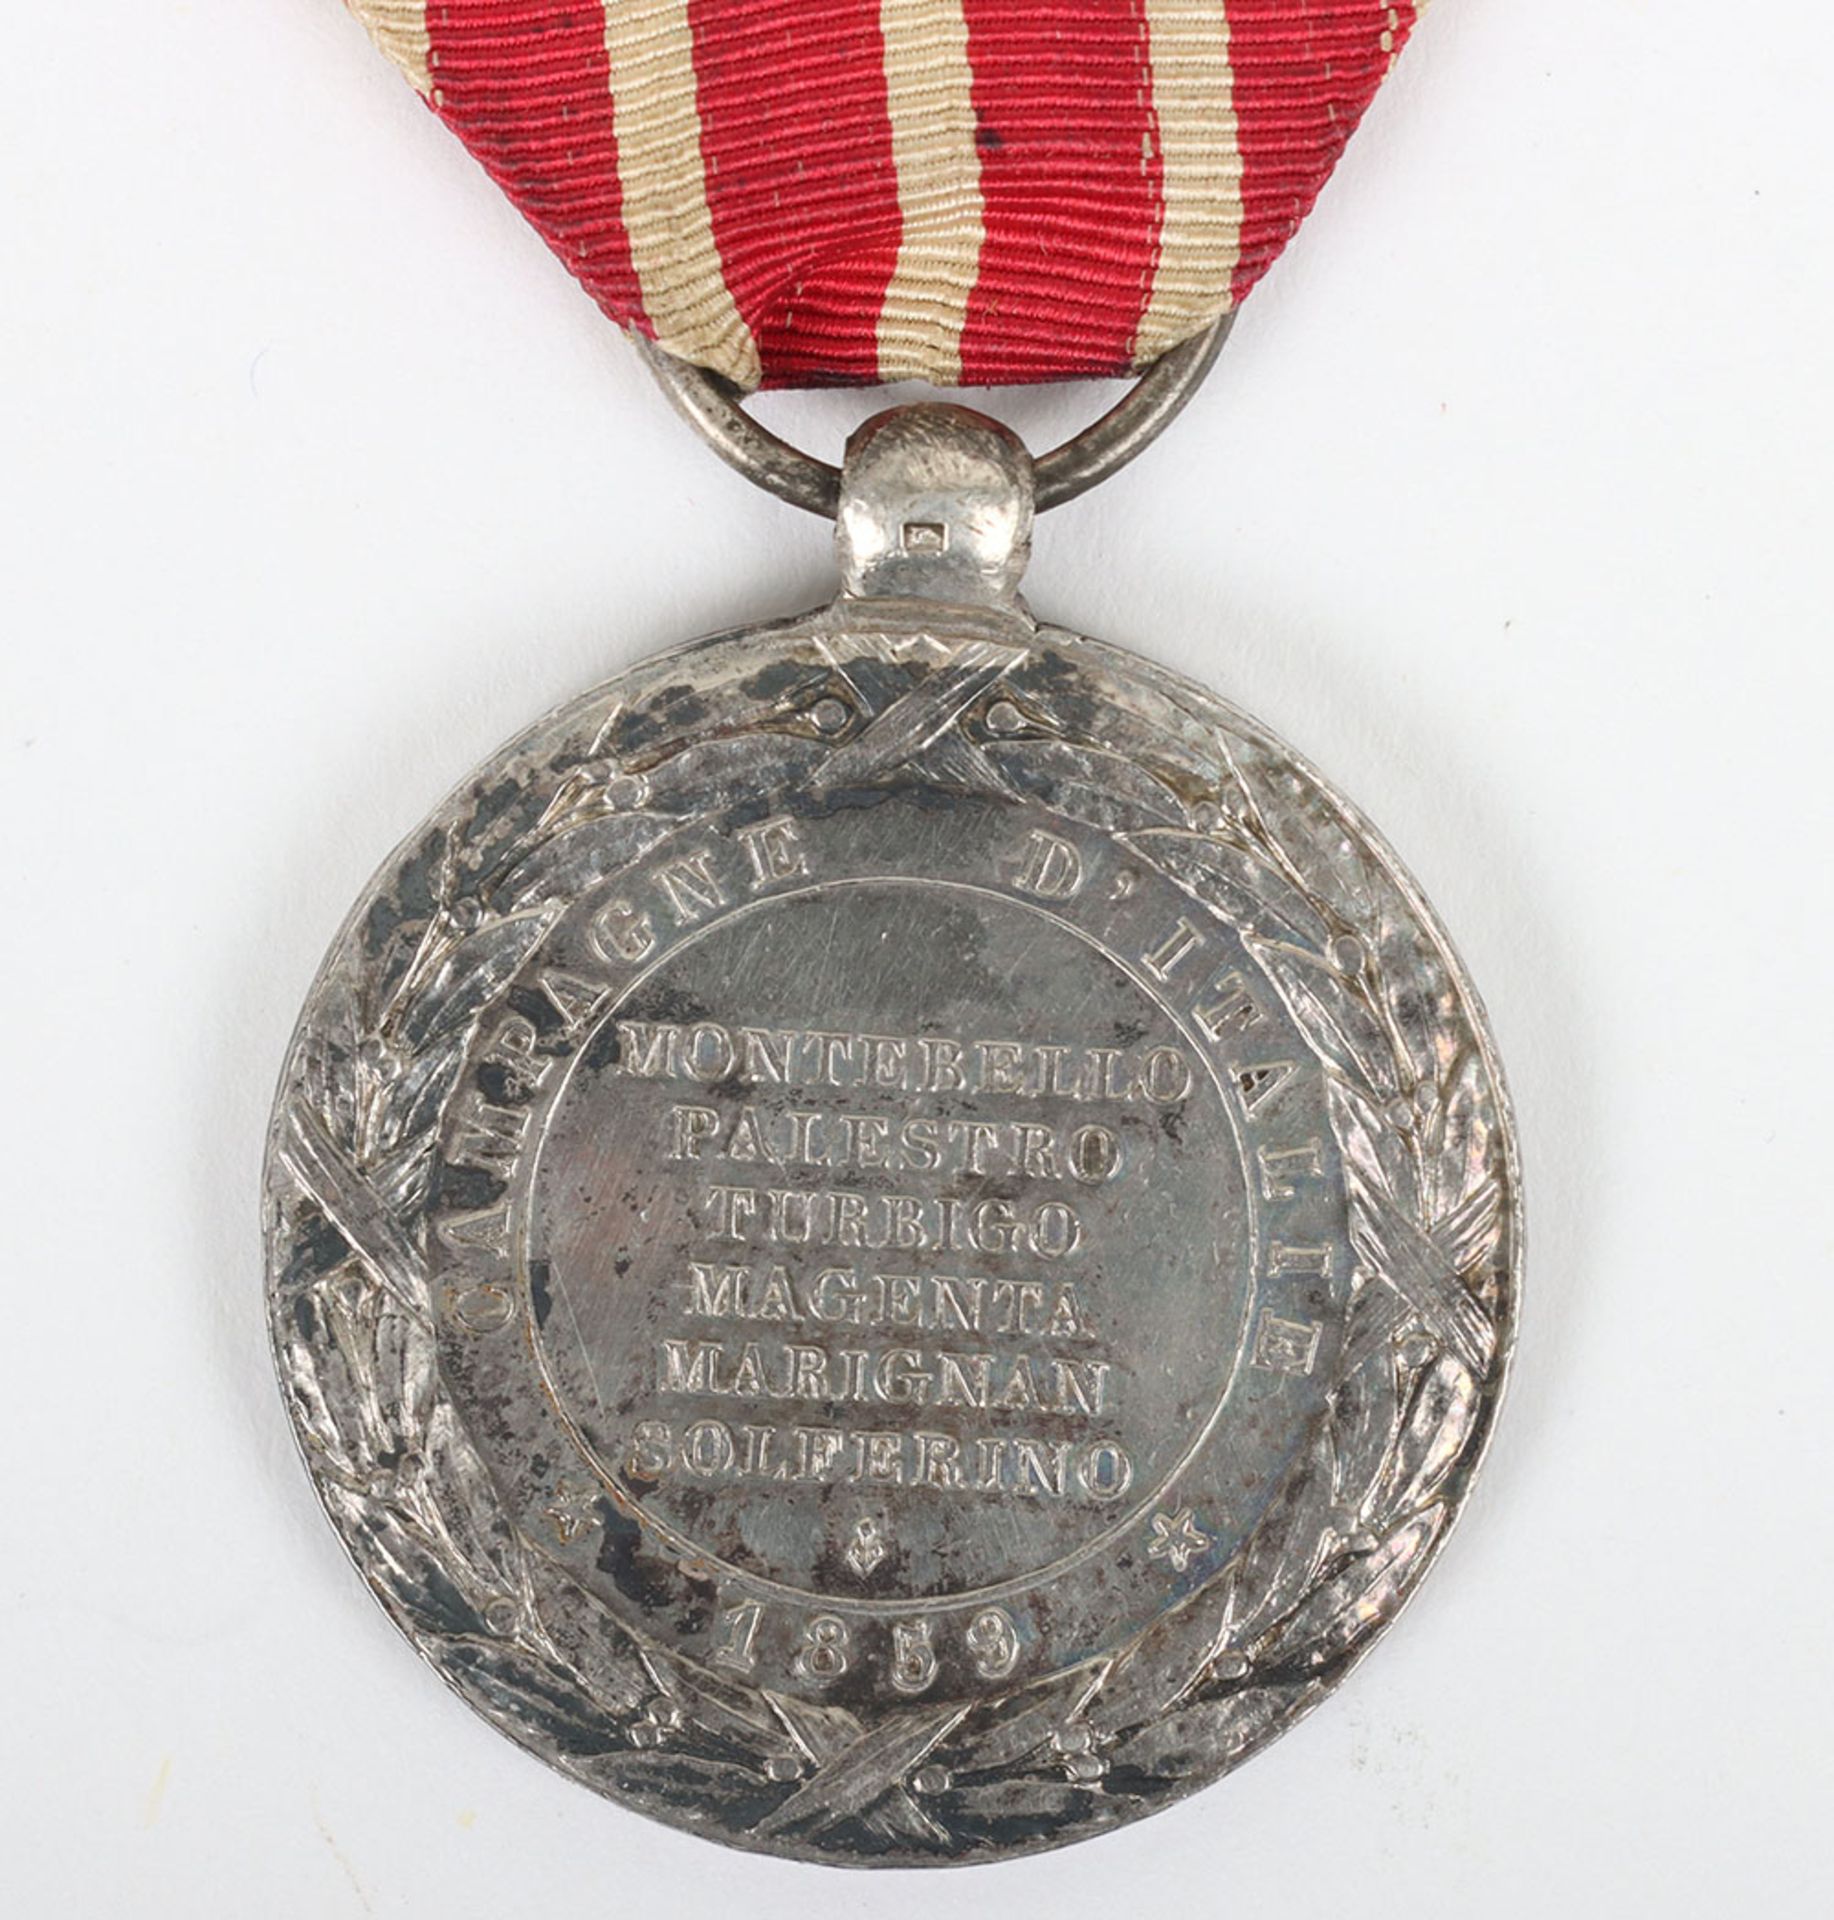 French 1859 Italian Campaign Napoleon III Medal - Image 4 of 4